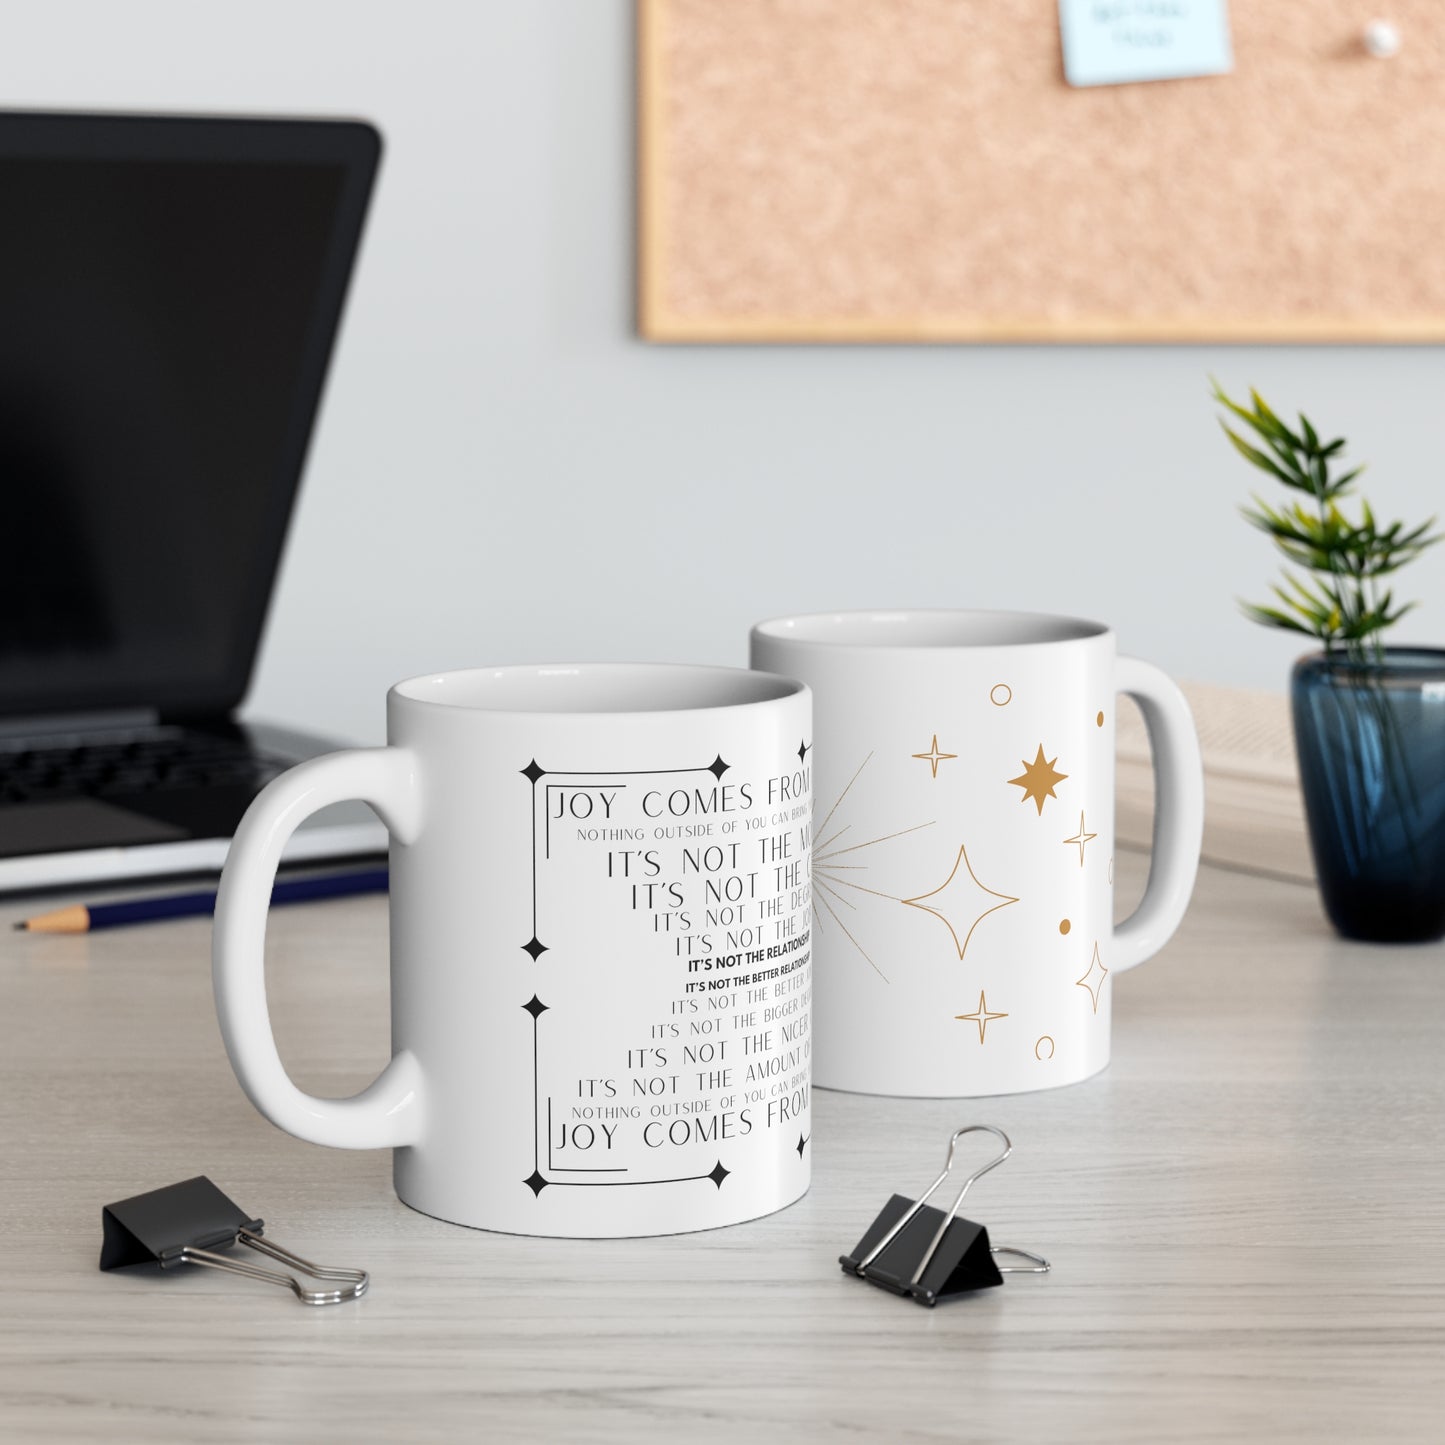 Joy comes from within. Not Aggressive. POWERFUL™️ Ceramic Mug 11oz